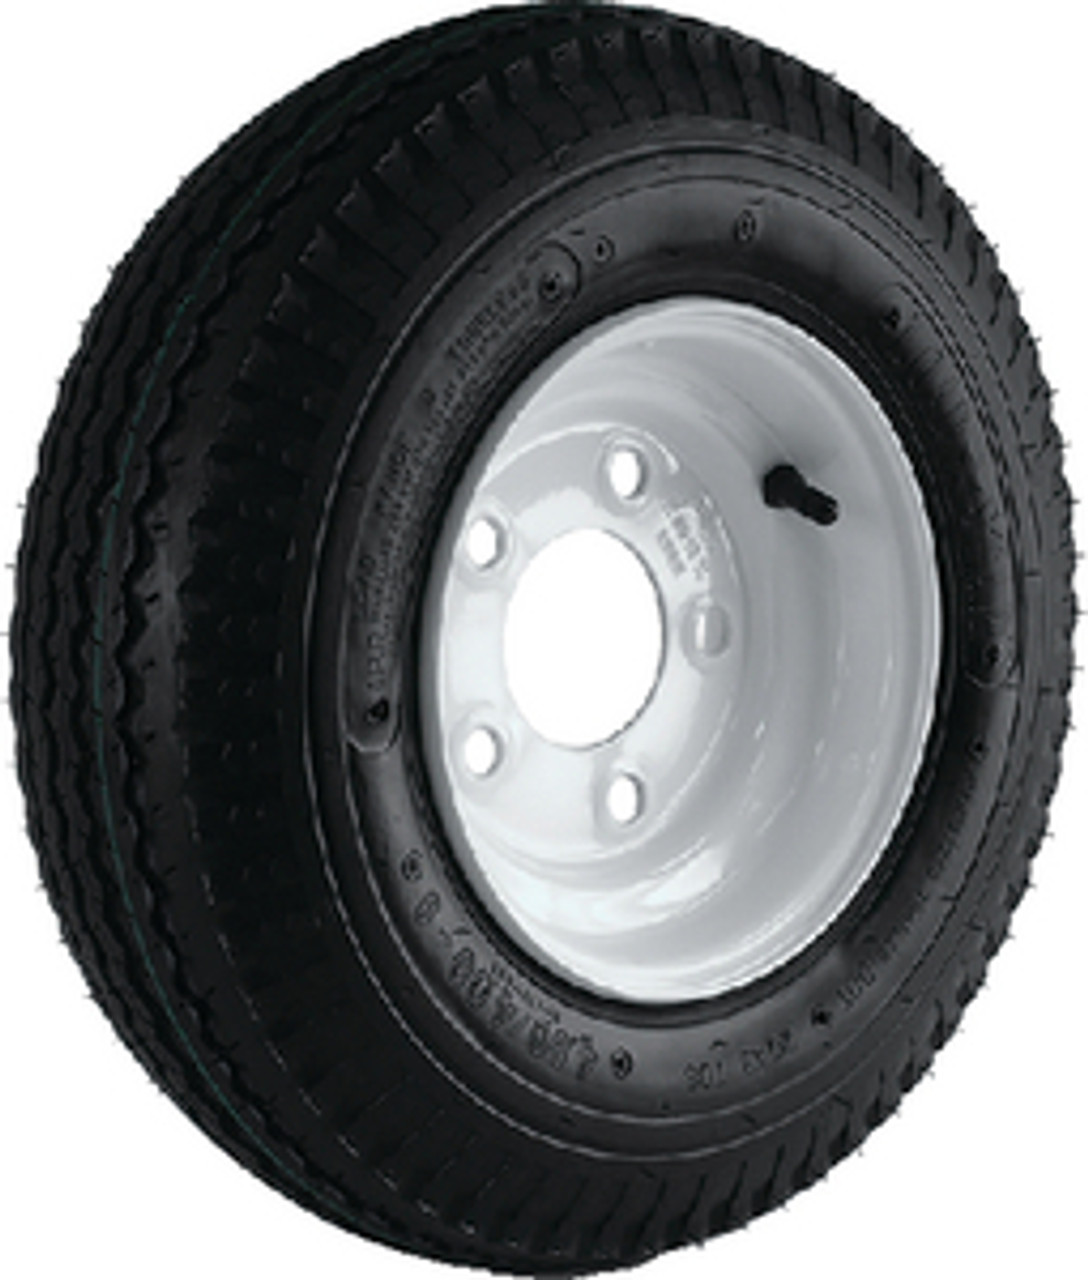 LOADSTAR - 8" BIAS TIRE AND WHEEL ASSEMBLY - Tire: 480-8 K371 Bolt Pattern: 5 on 4Â½" Wheel: Solid Finish: White Load Range: B Ply: 4 Max Load: 590 lbs.